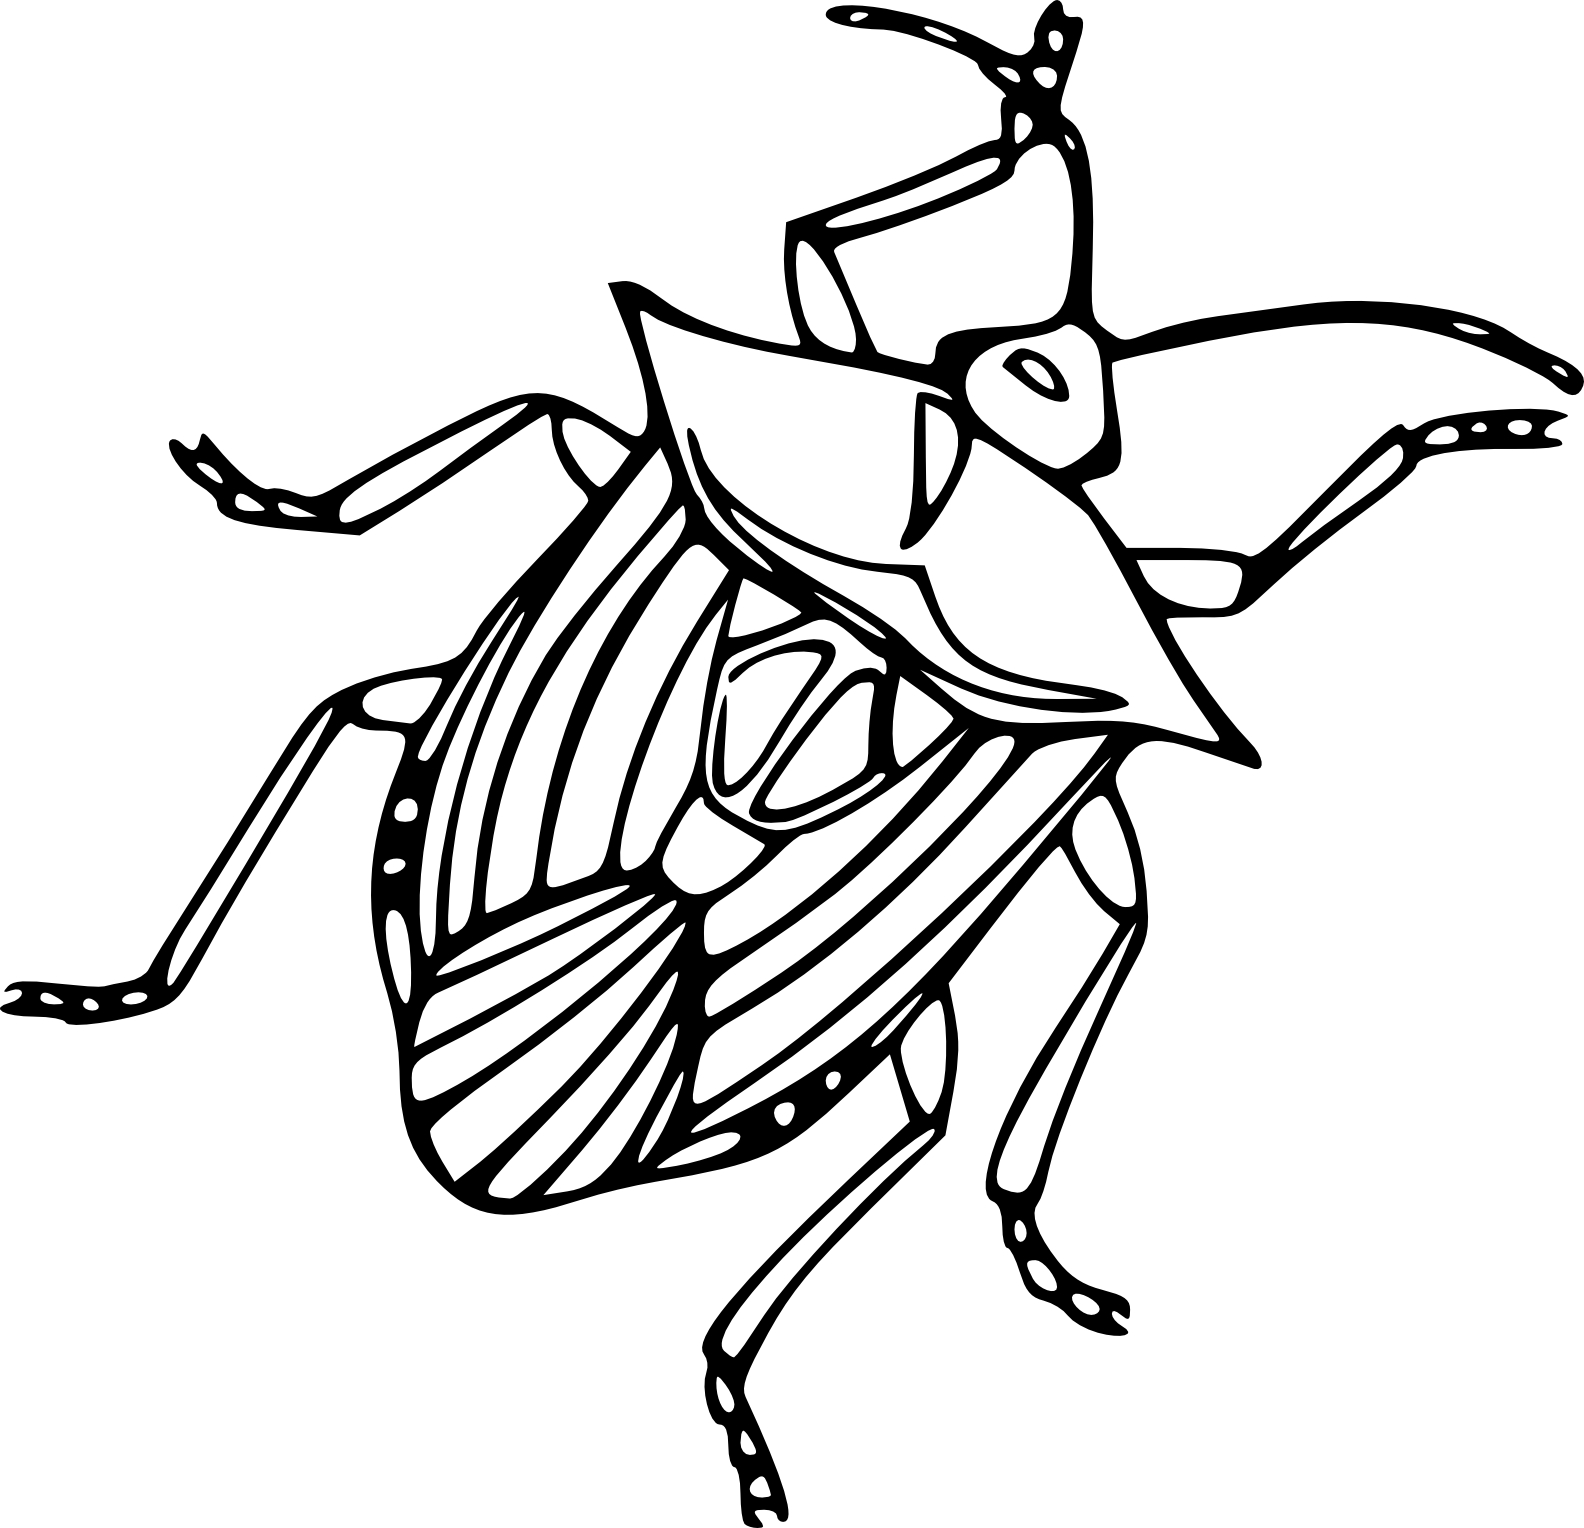 Aphid coloring page